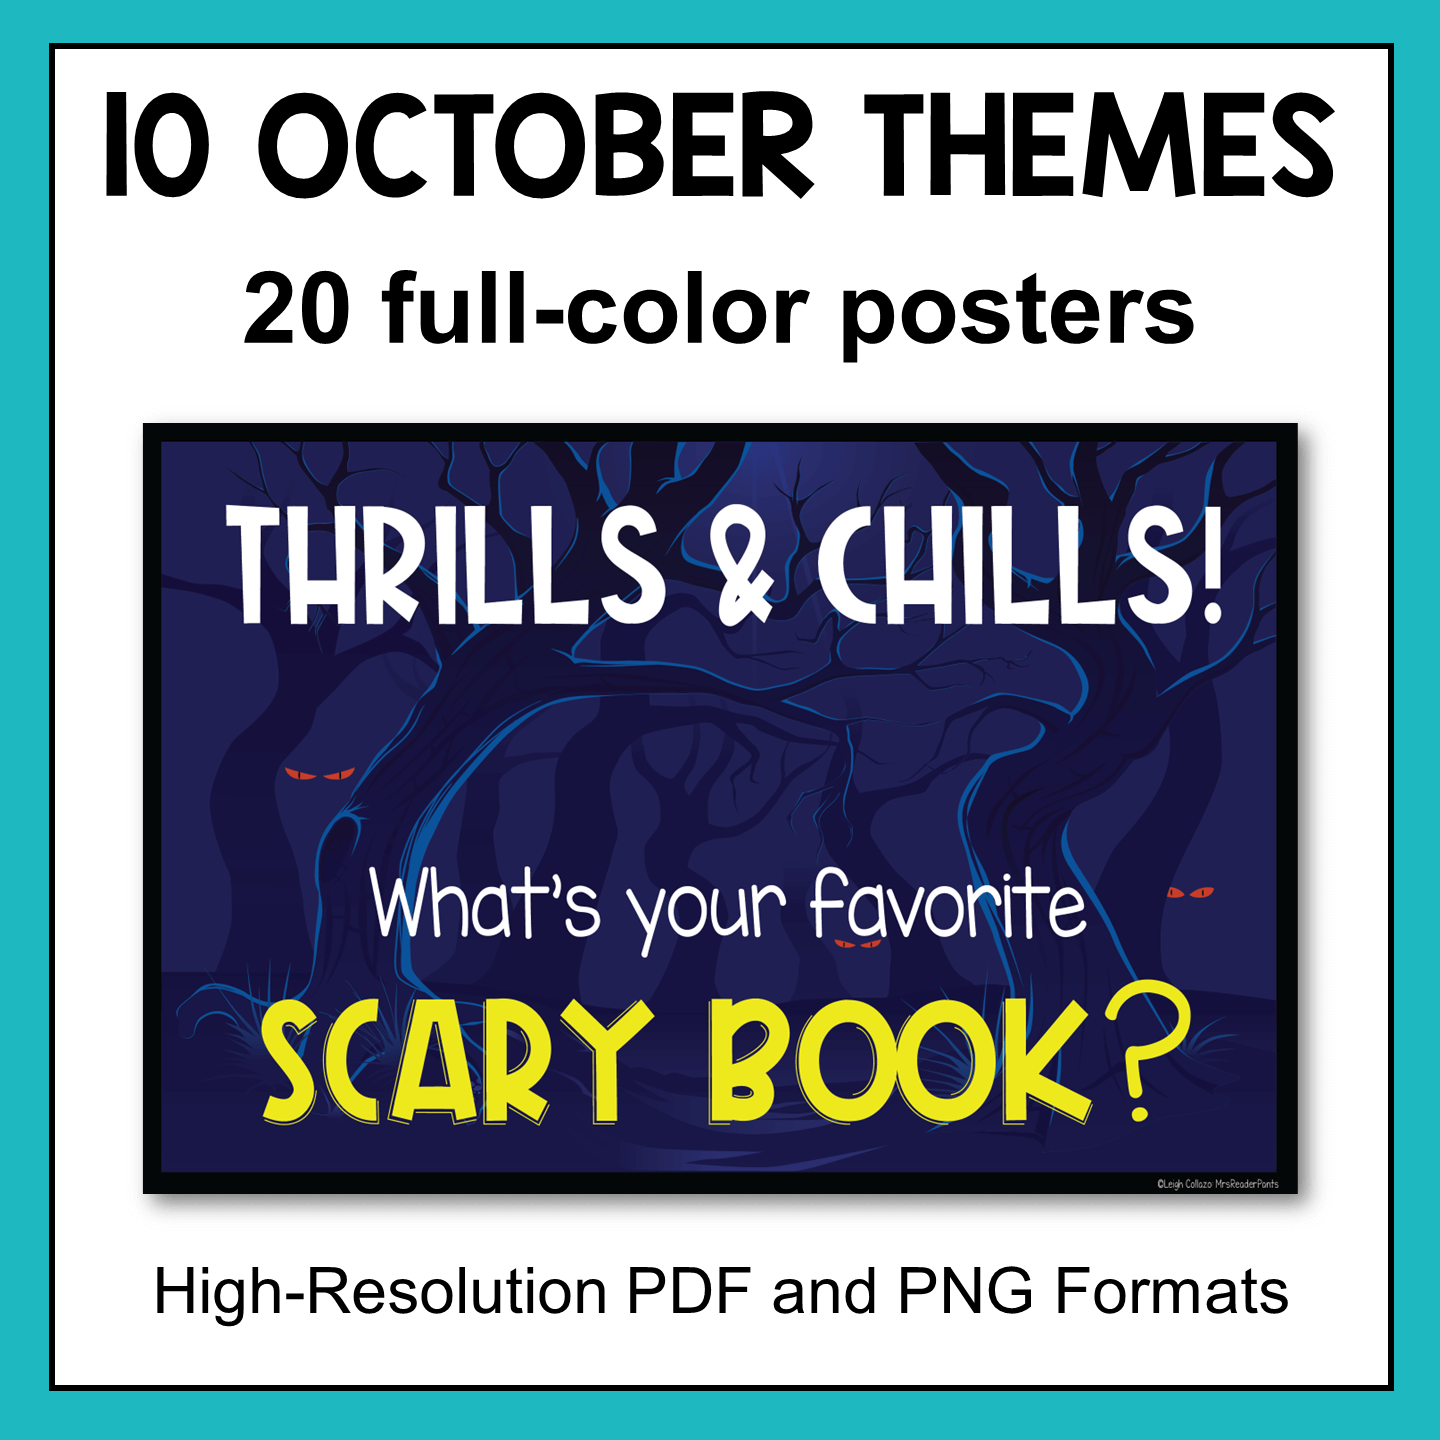 This October Library Display Posters set has 10 themes.